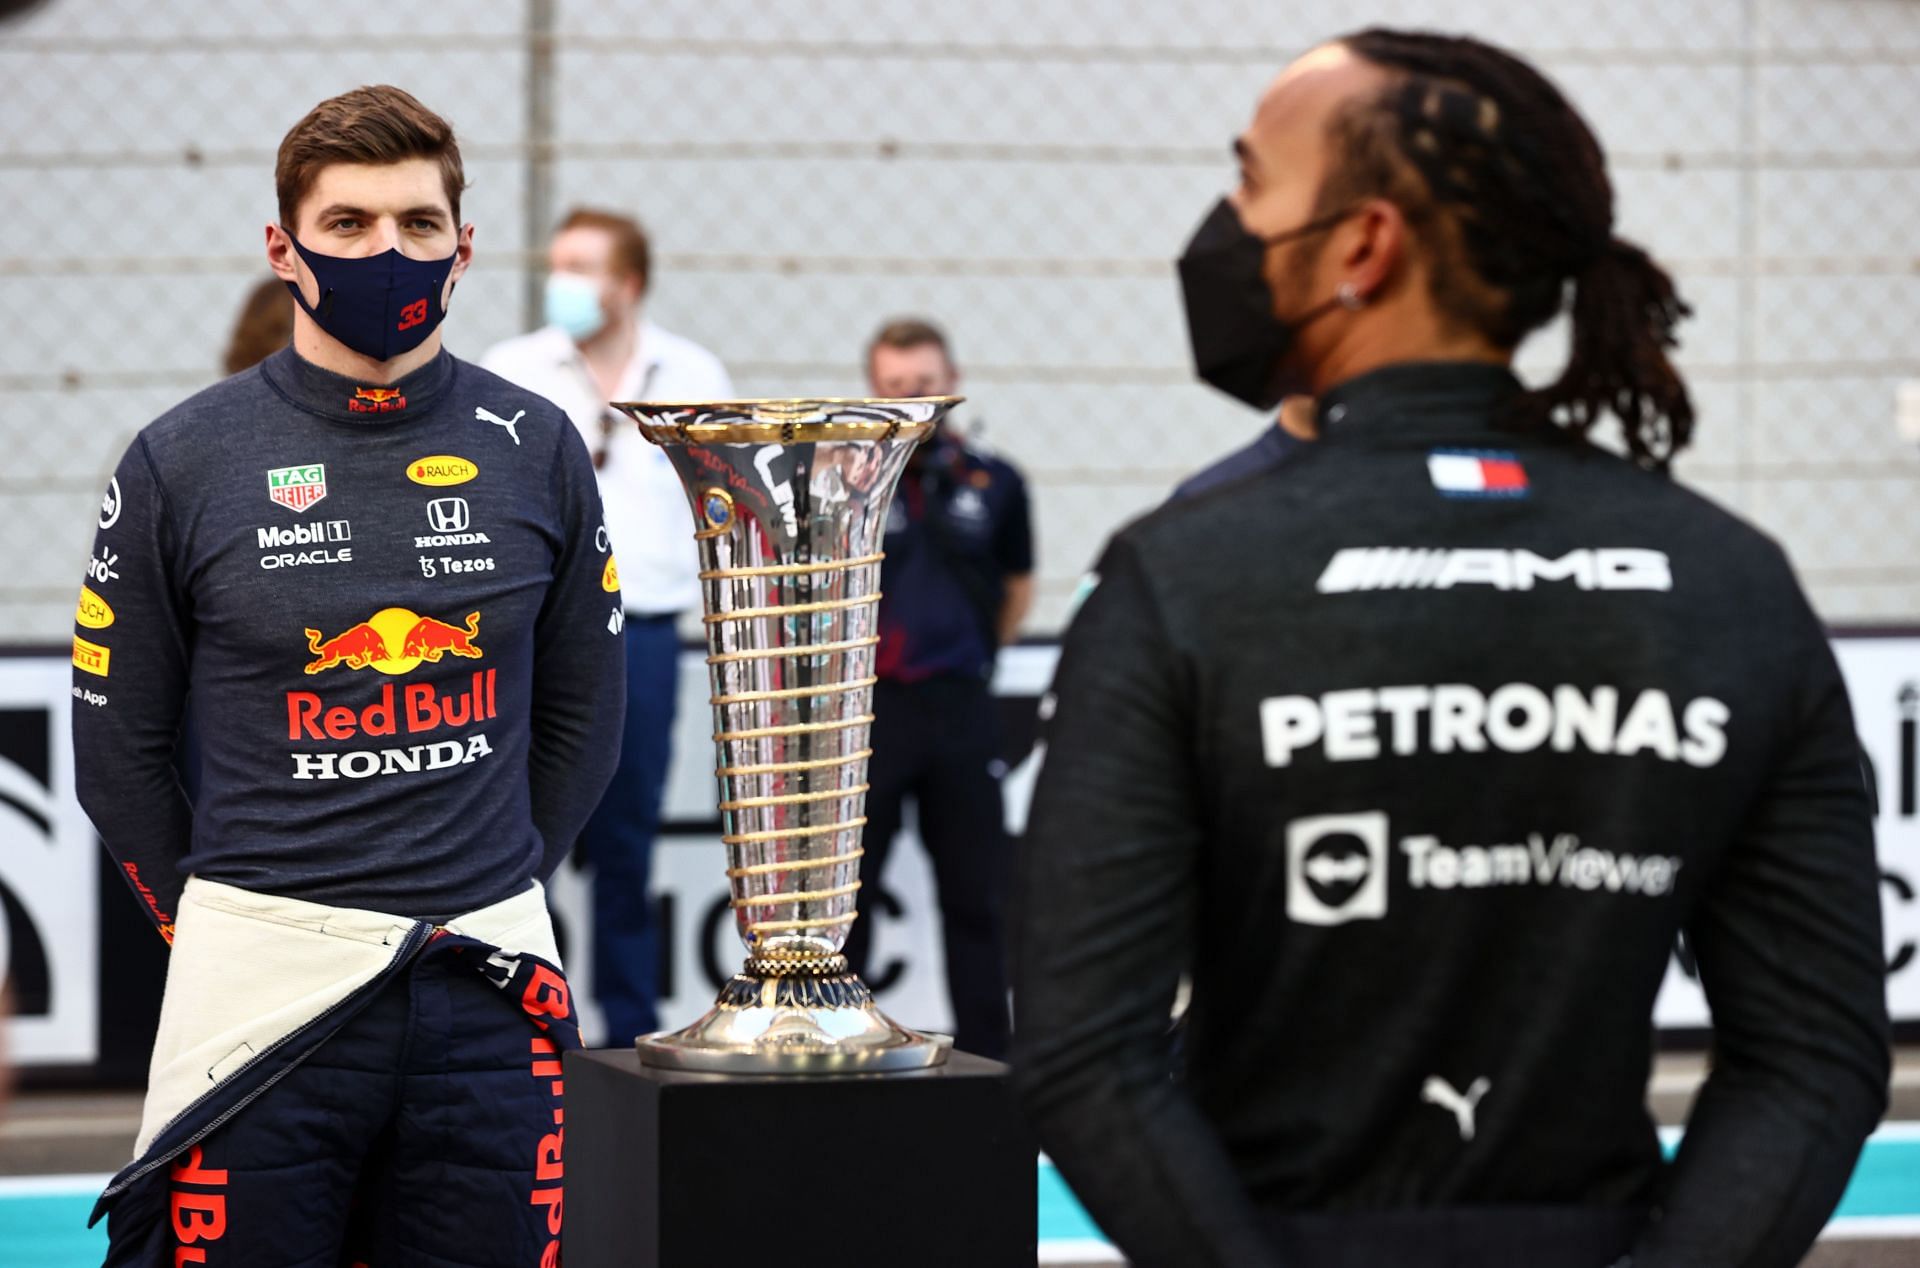 Max Verstappen (left) and Lewis Hamilton (right) at the F1 Grand Prix of Abu Dhabi